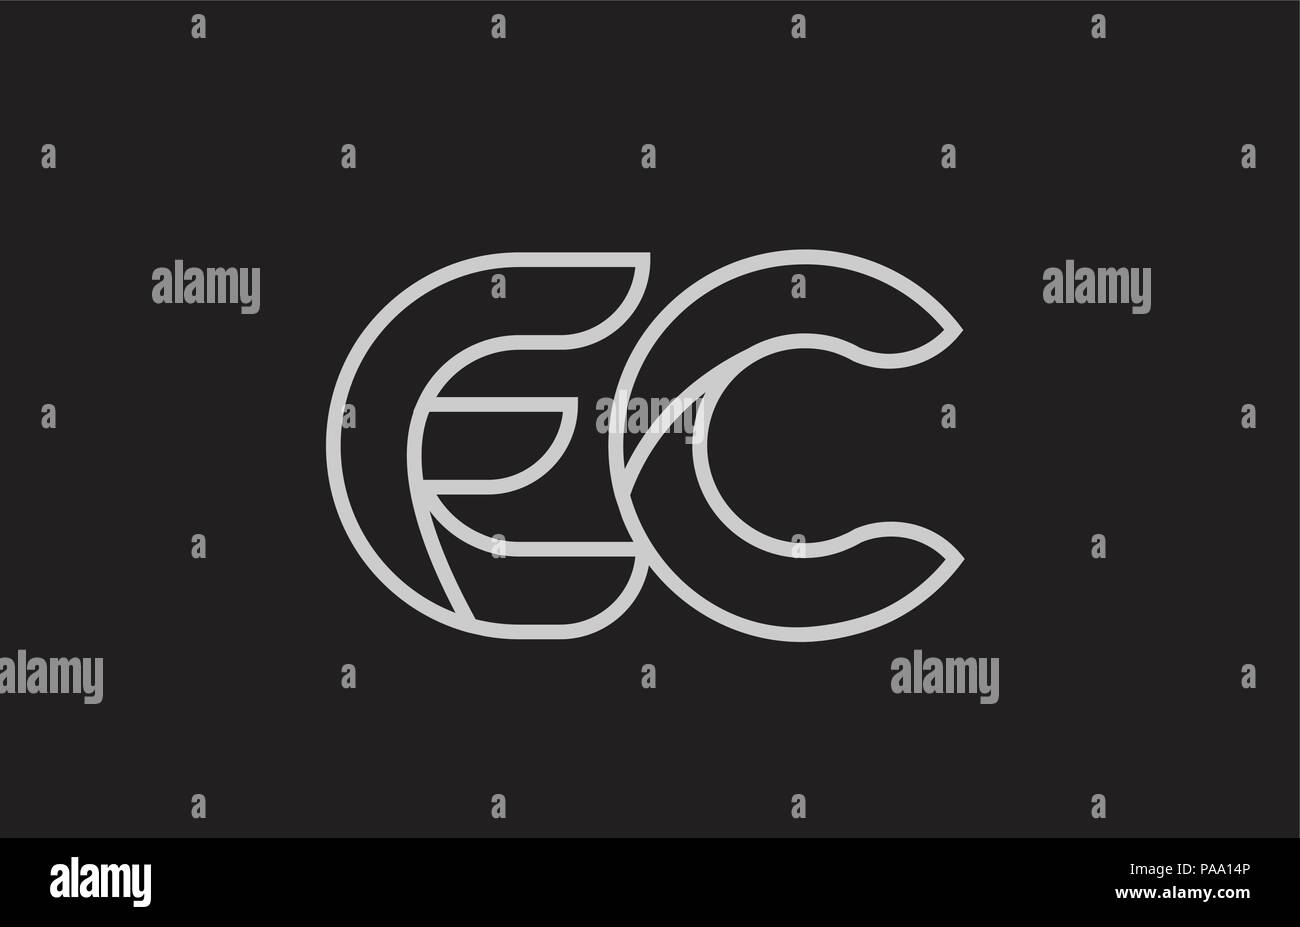 black and white alphabet letter ec e c logo combination design suitable for a company or business Stock Vector